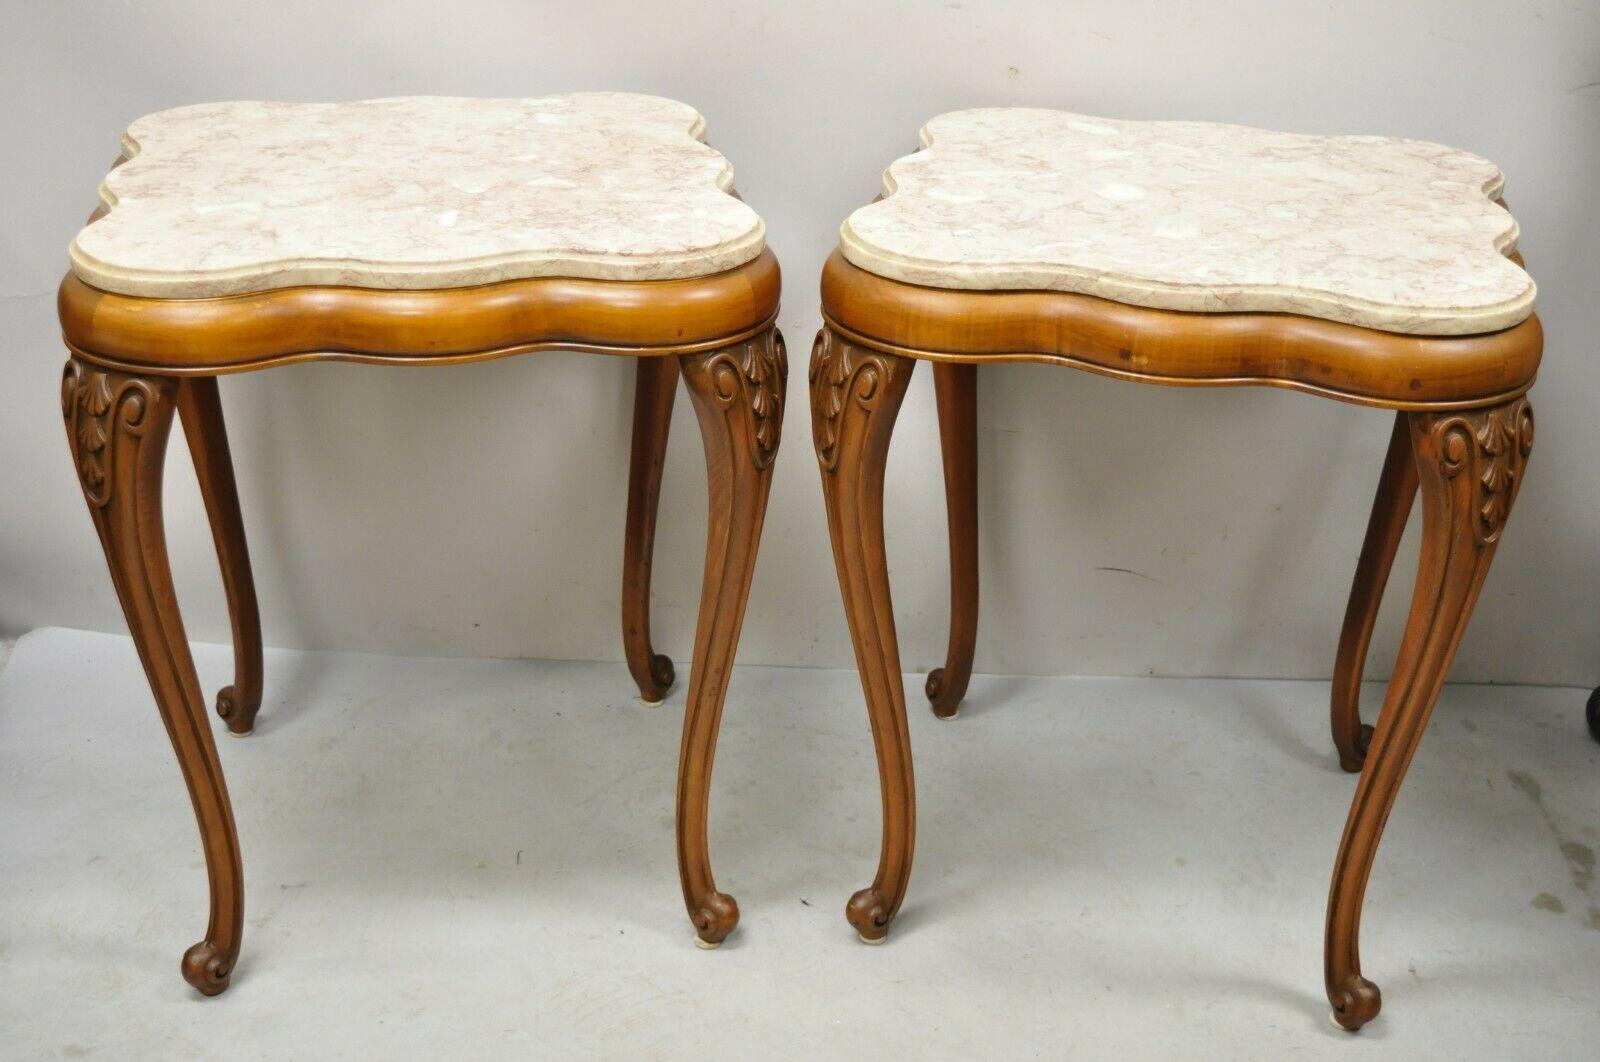 Vintage French Provincial Pink Marble Top Wood Base End Tables - a Pair. Item features pink shaped scalloped edge marble tops, wooden base, cabriole legs, very nice vintage pair, great style and form. Circa Mid 20th Century. Measurements: 27.5